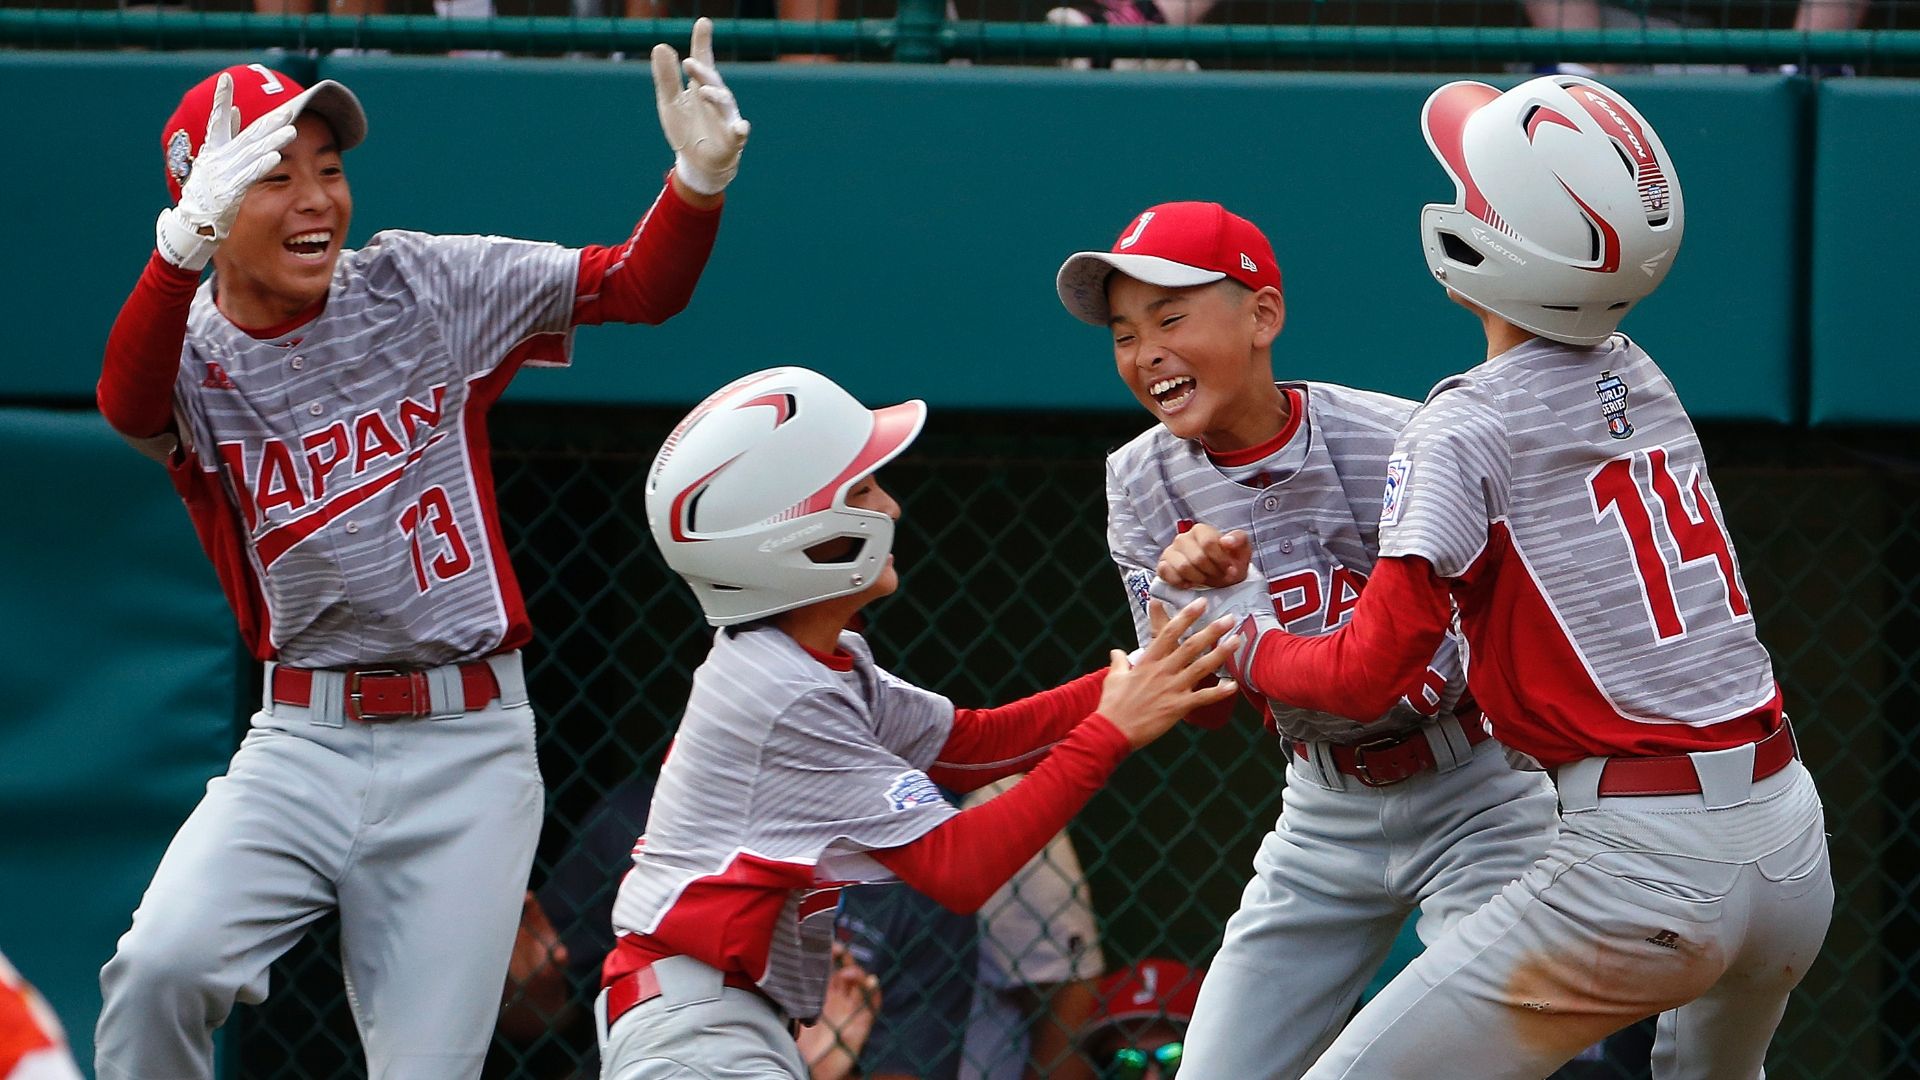 Japan pours on offense in LLWS final ESPN Video